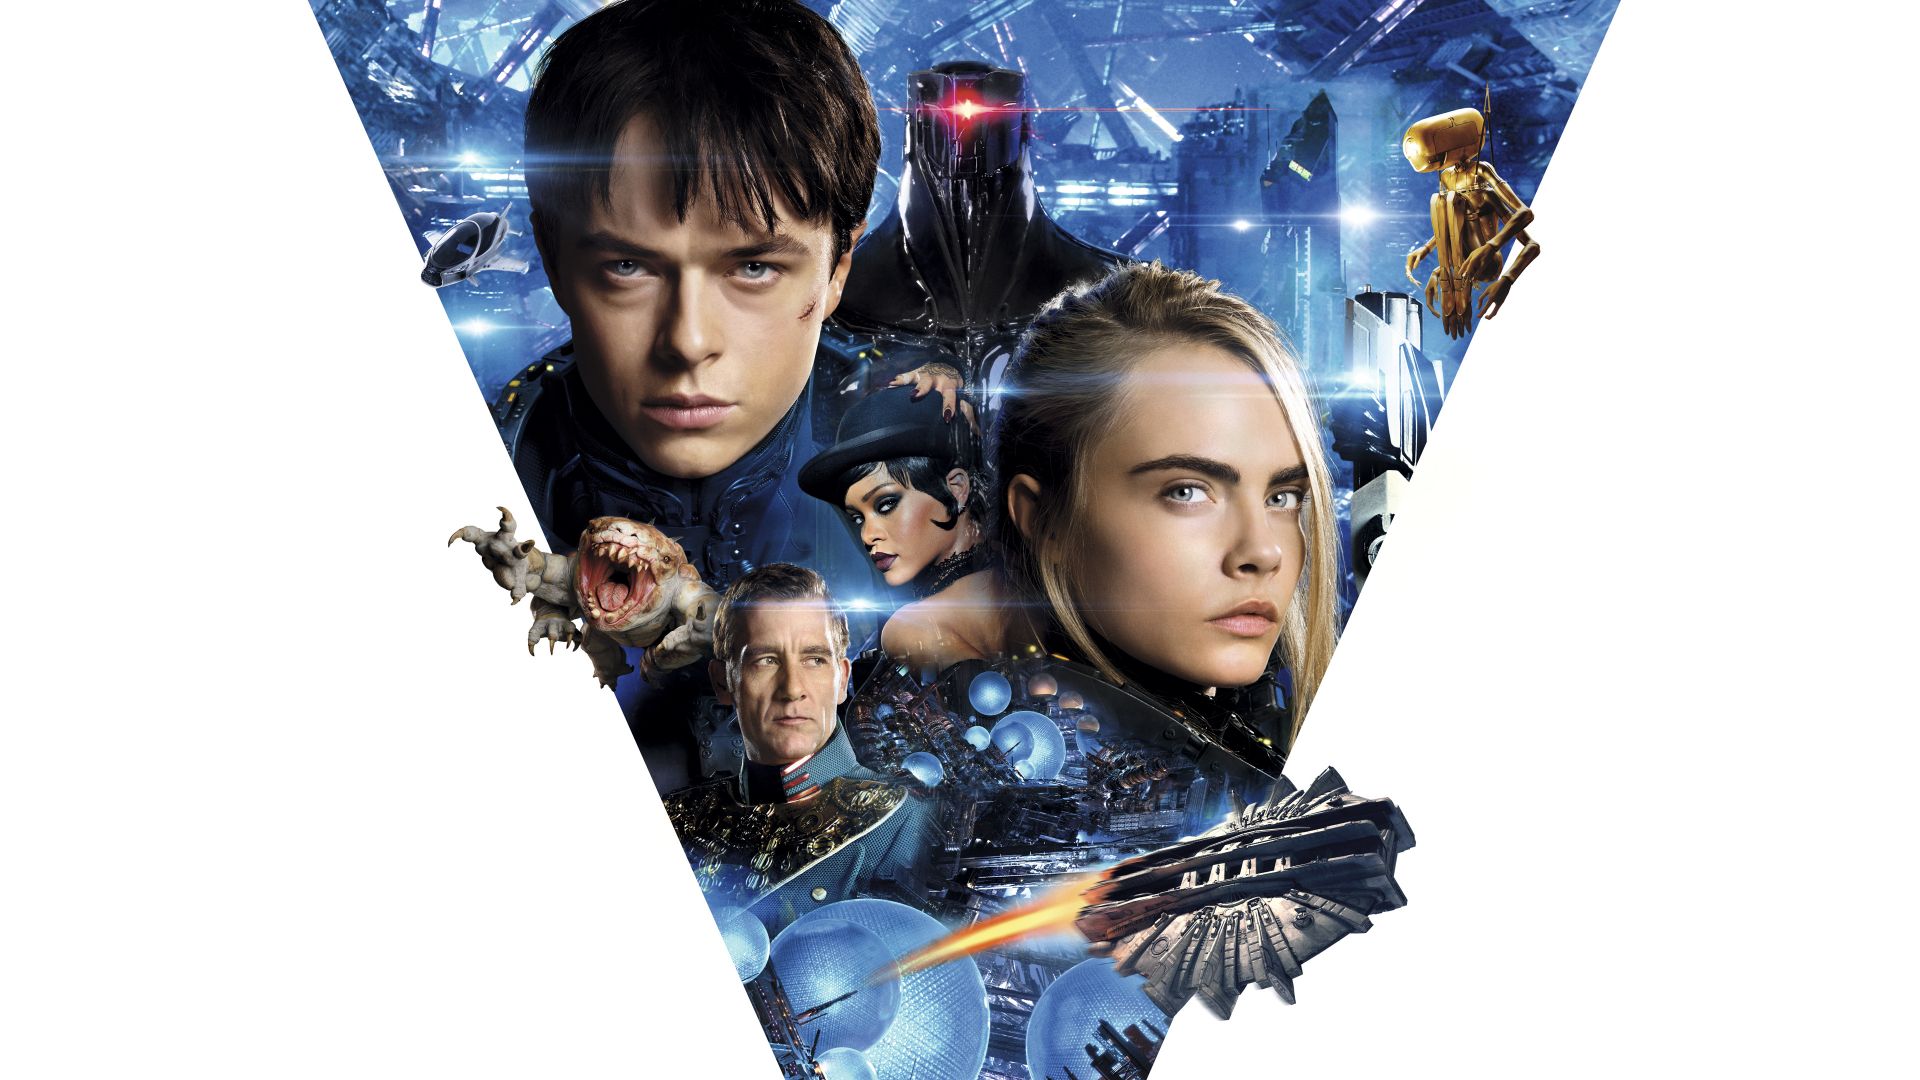 Wallpaper Valerian and the City of a Thousand Planets, 2017 movie, 4k, 8k